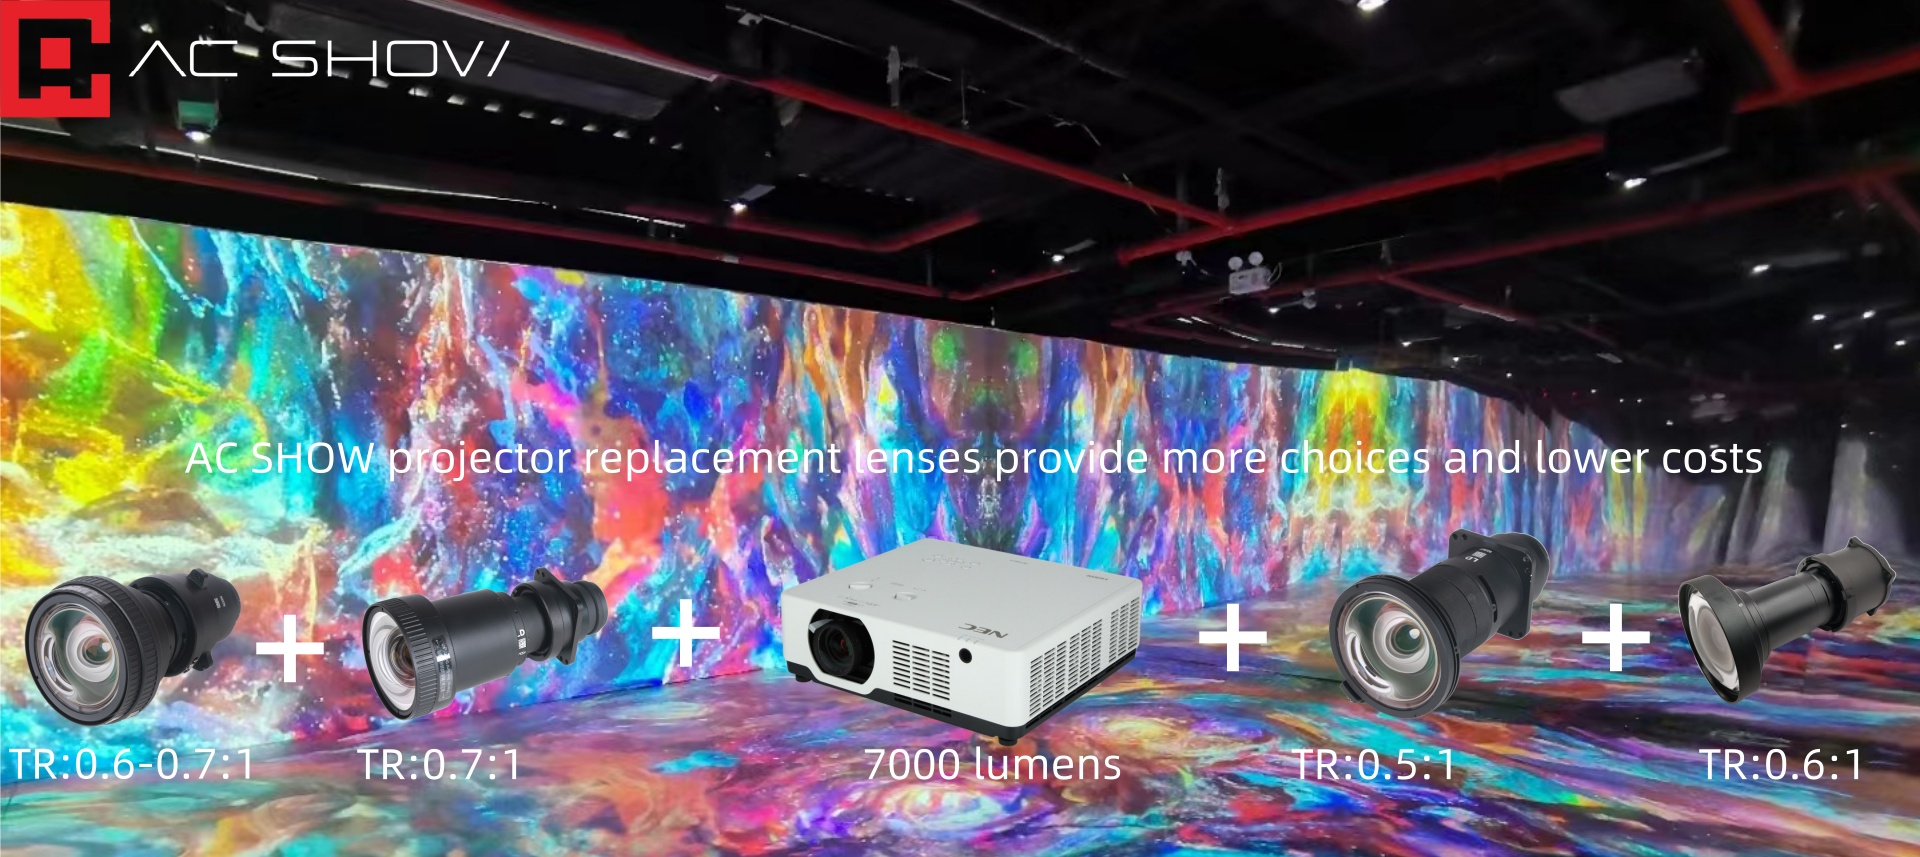 AC SHOW projector replacement lenses provide more choices and lower costs